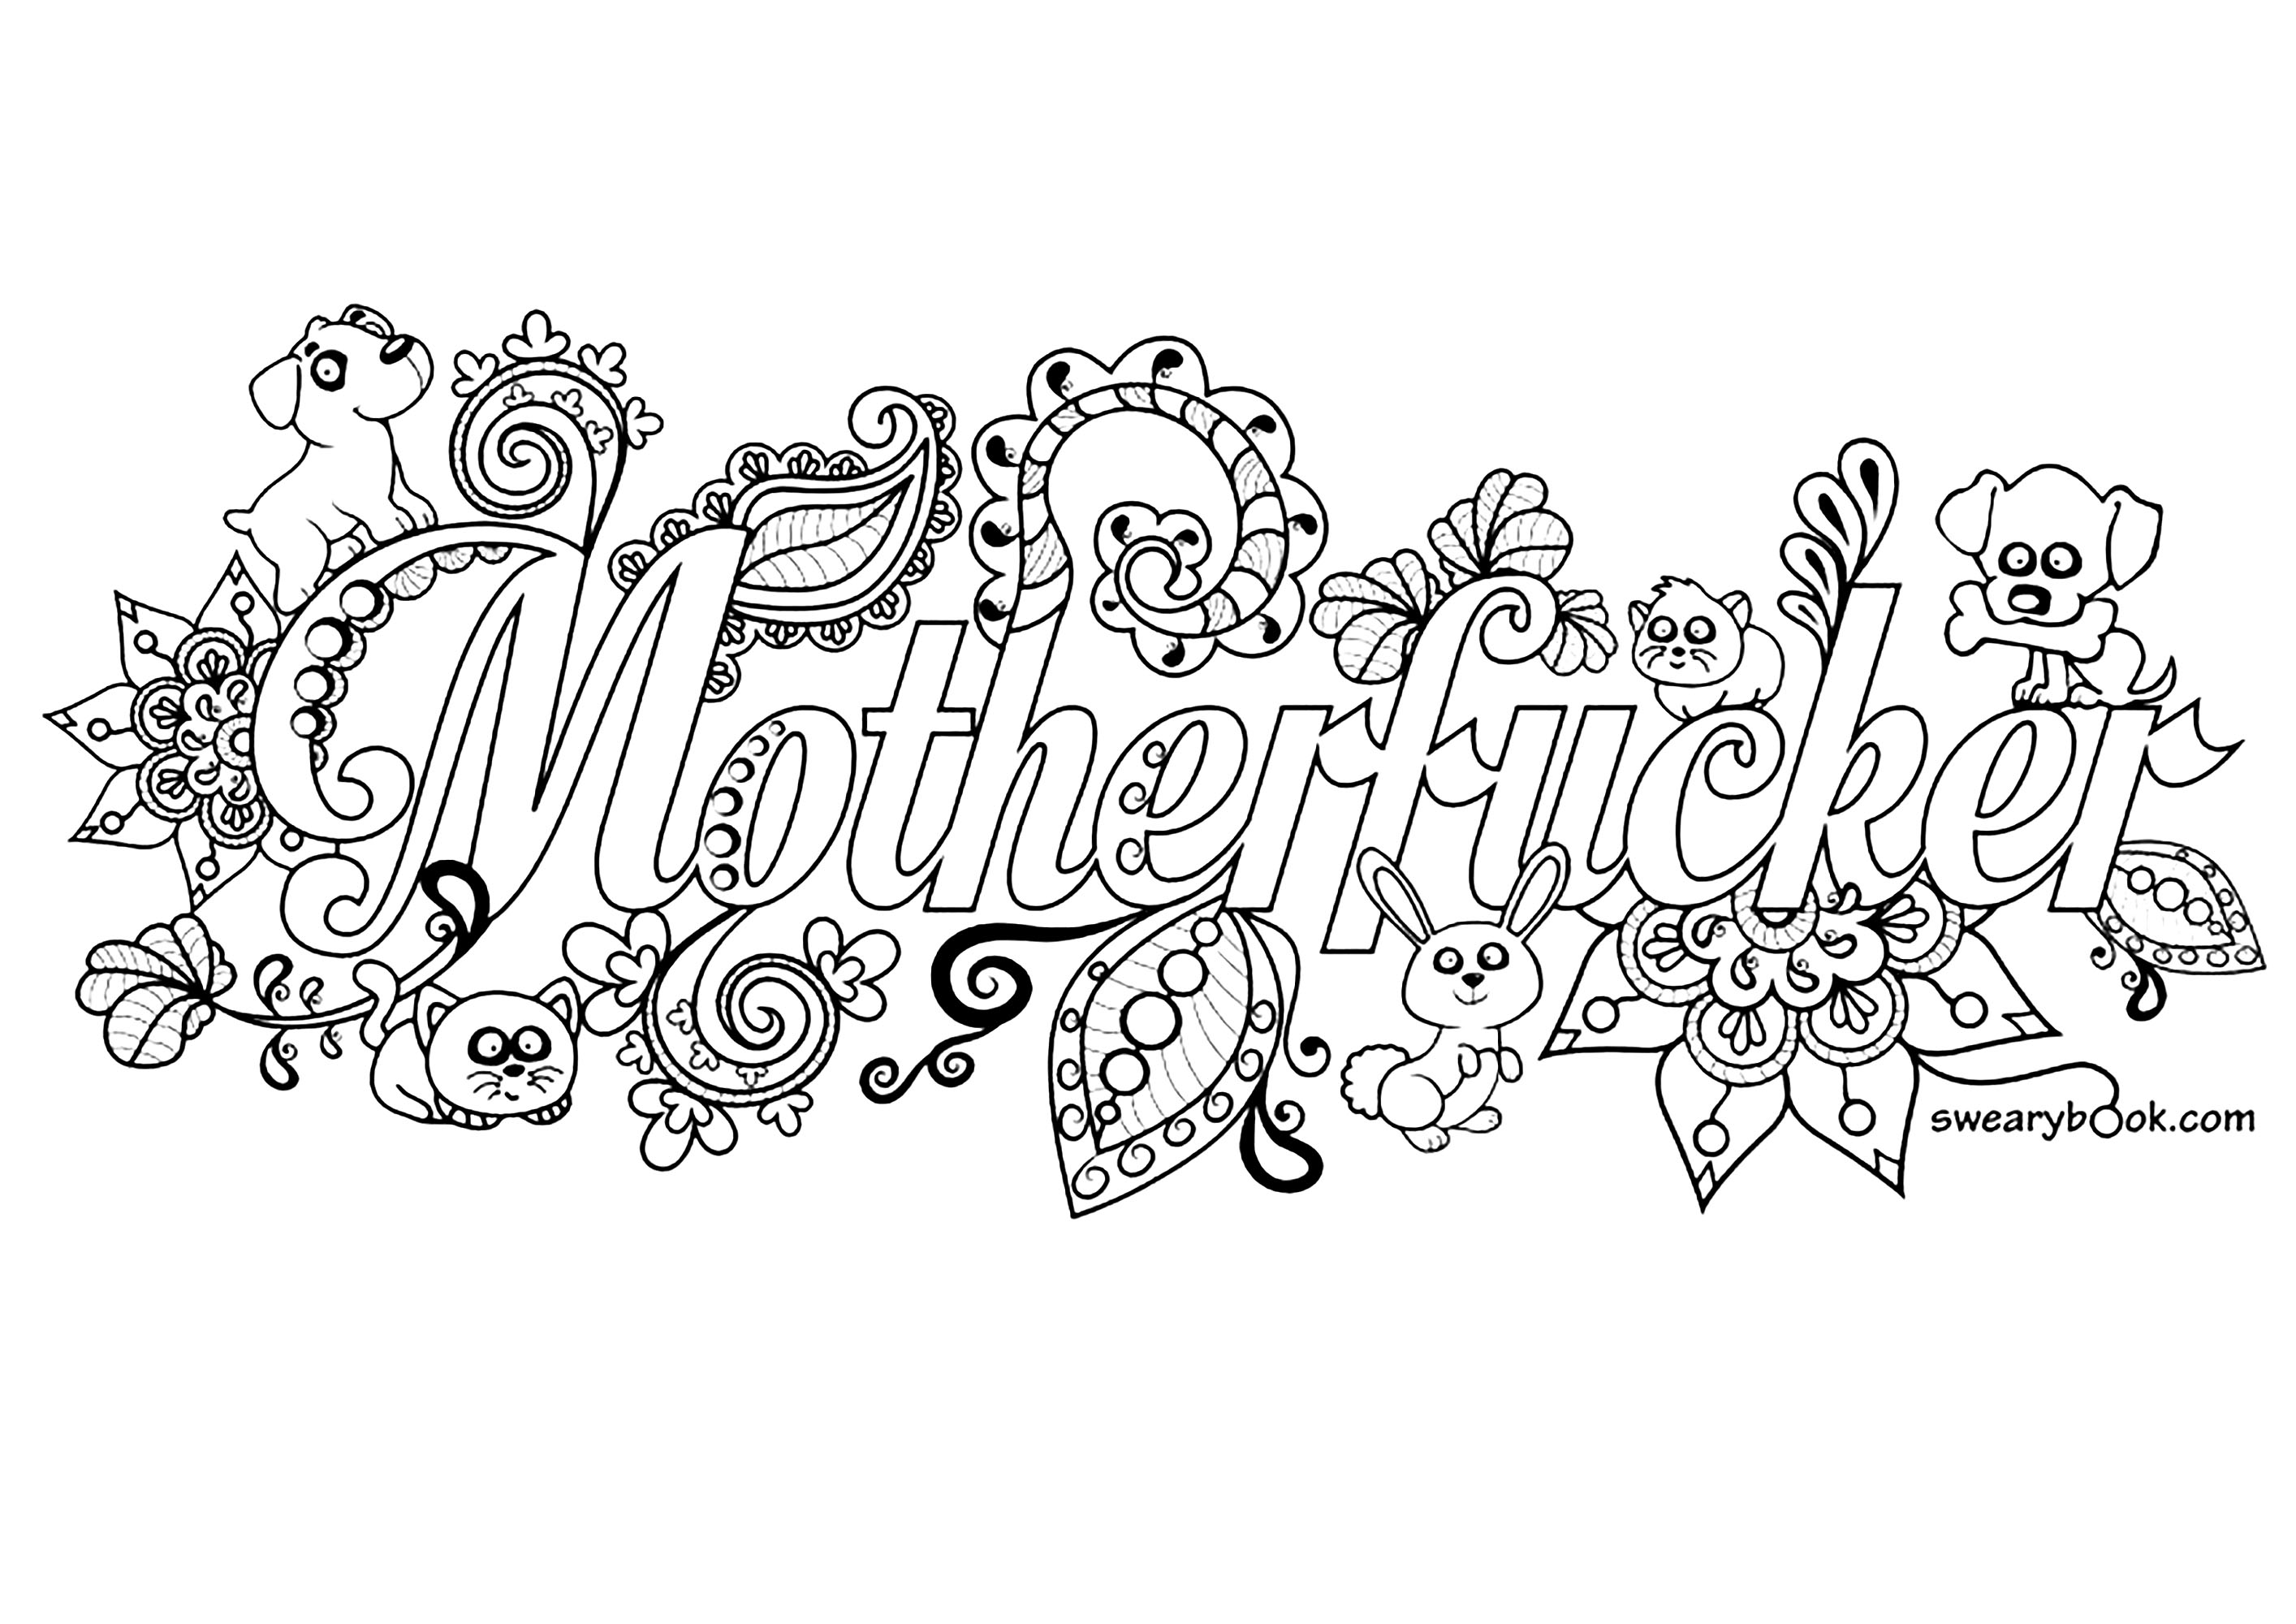 Motherfucker : Swear word coloring page from Swearybook.com